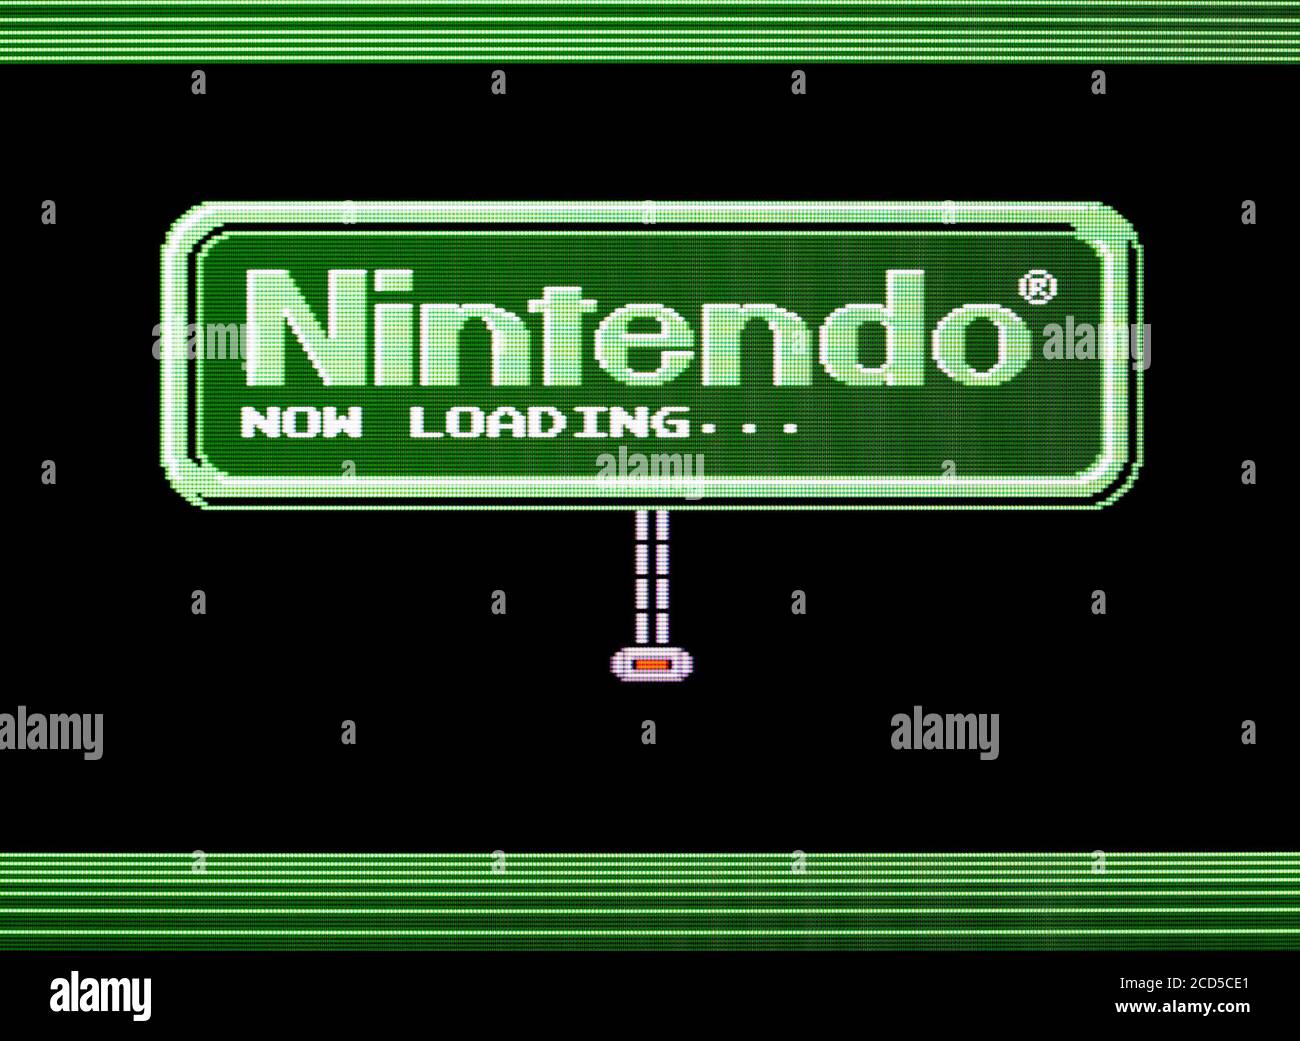 Loading Screen Nintendo Famicom Disk System Videogame Editorial Use Only Stock Photo Alamy